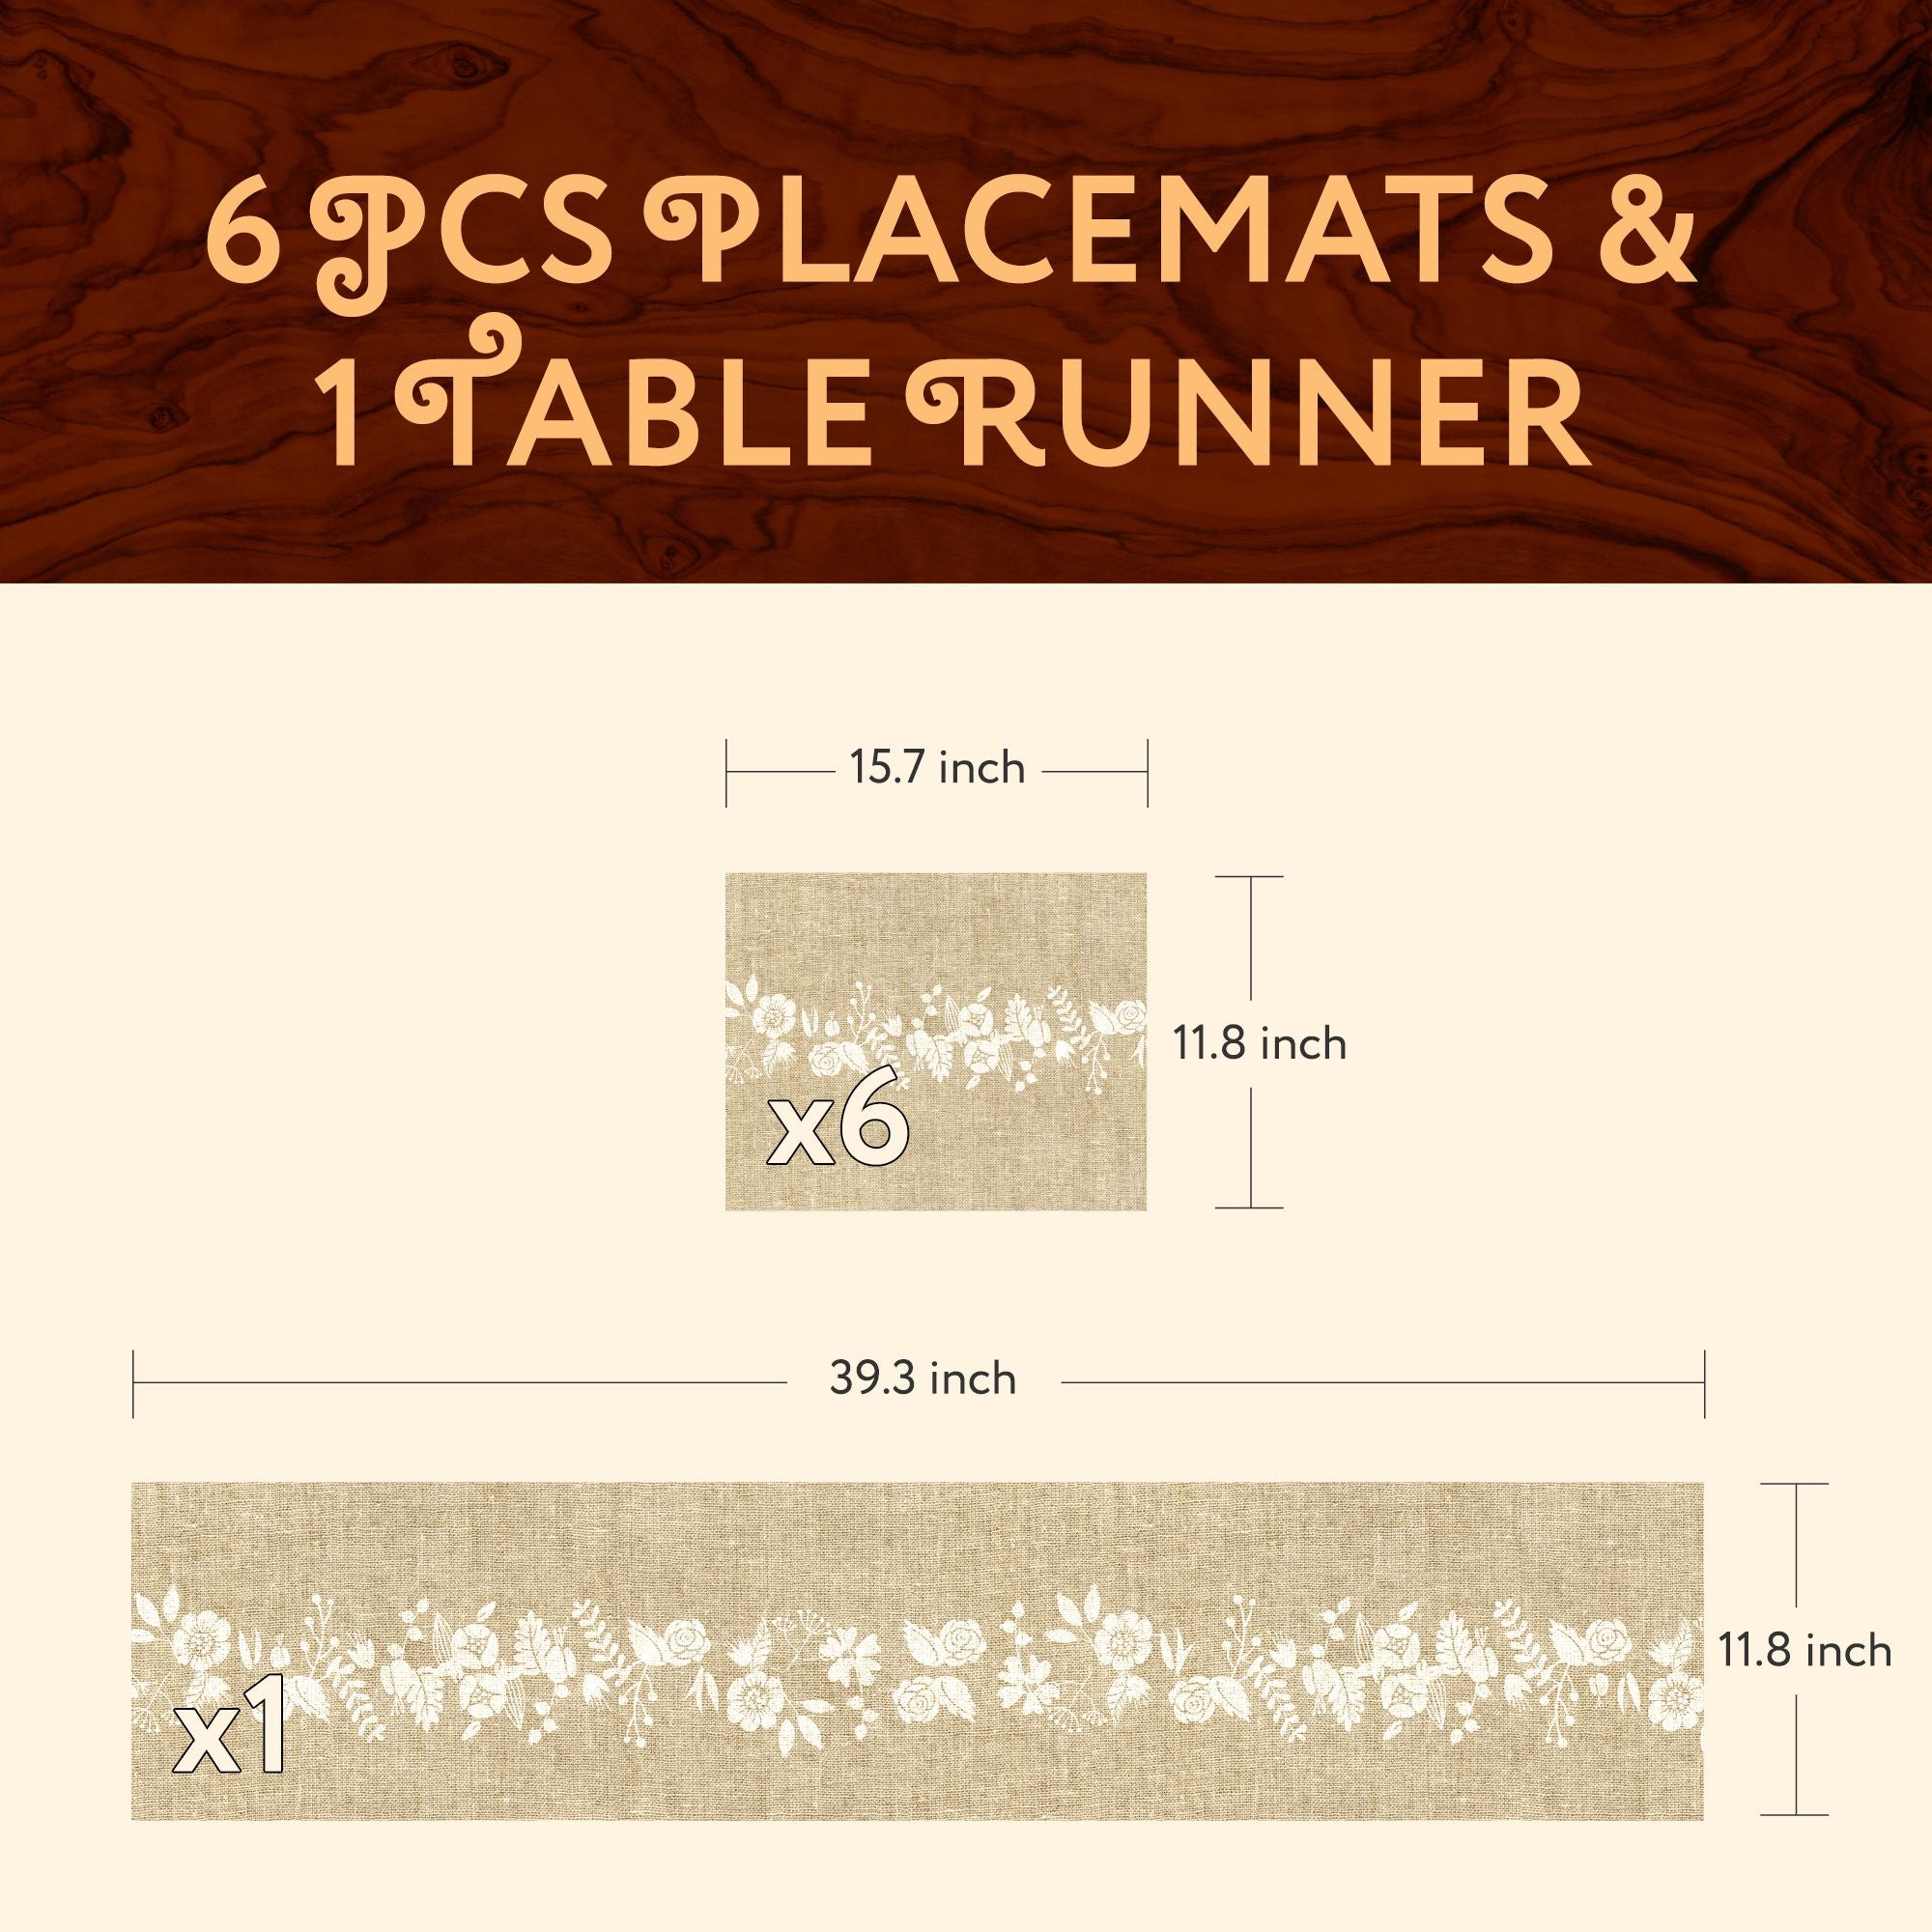 1 TABLE RUNNER + 6 PLACEMATS SET (JUTE AND FLOWER)